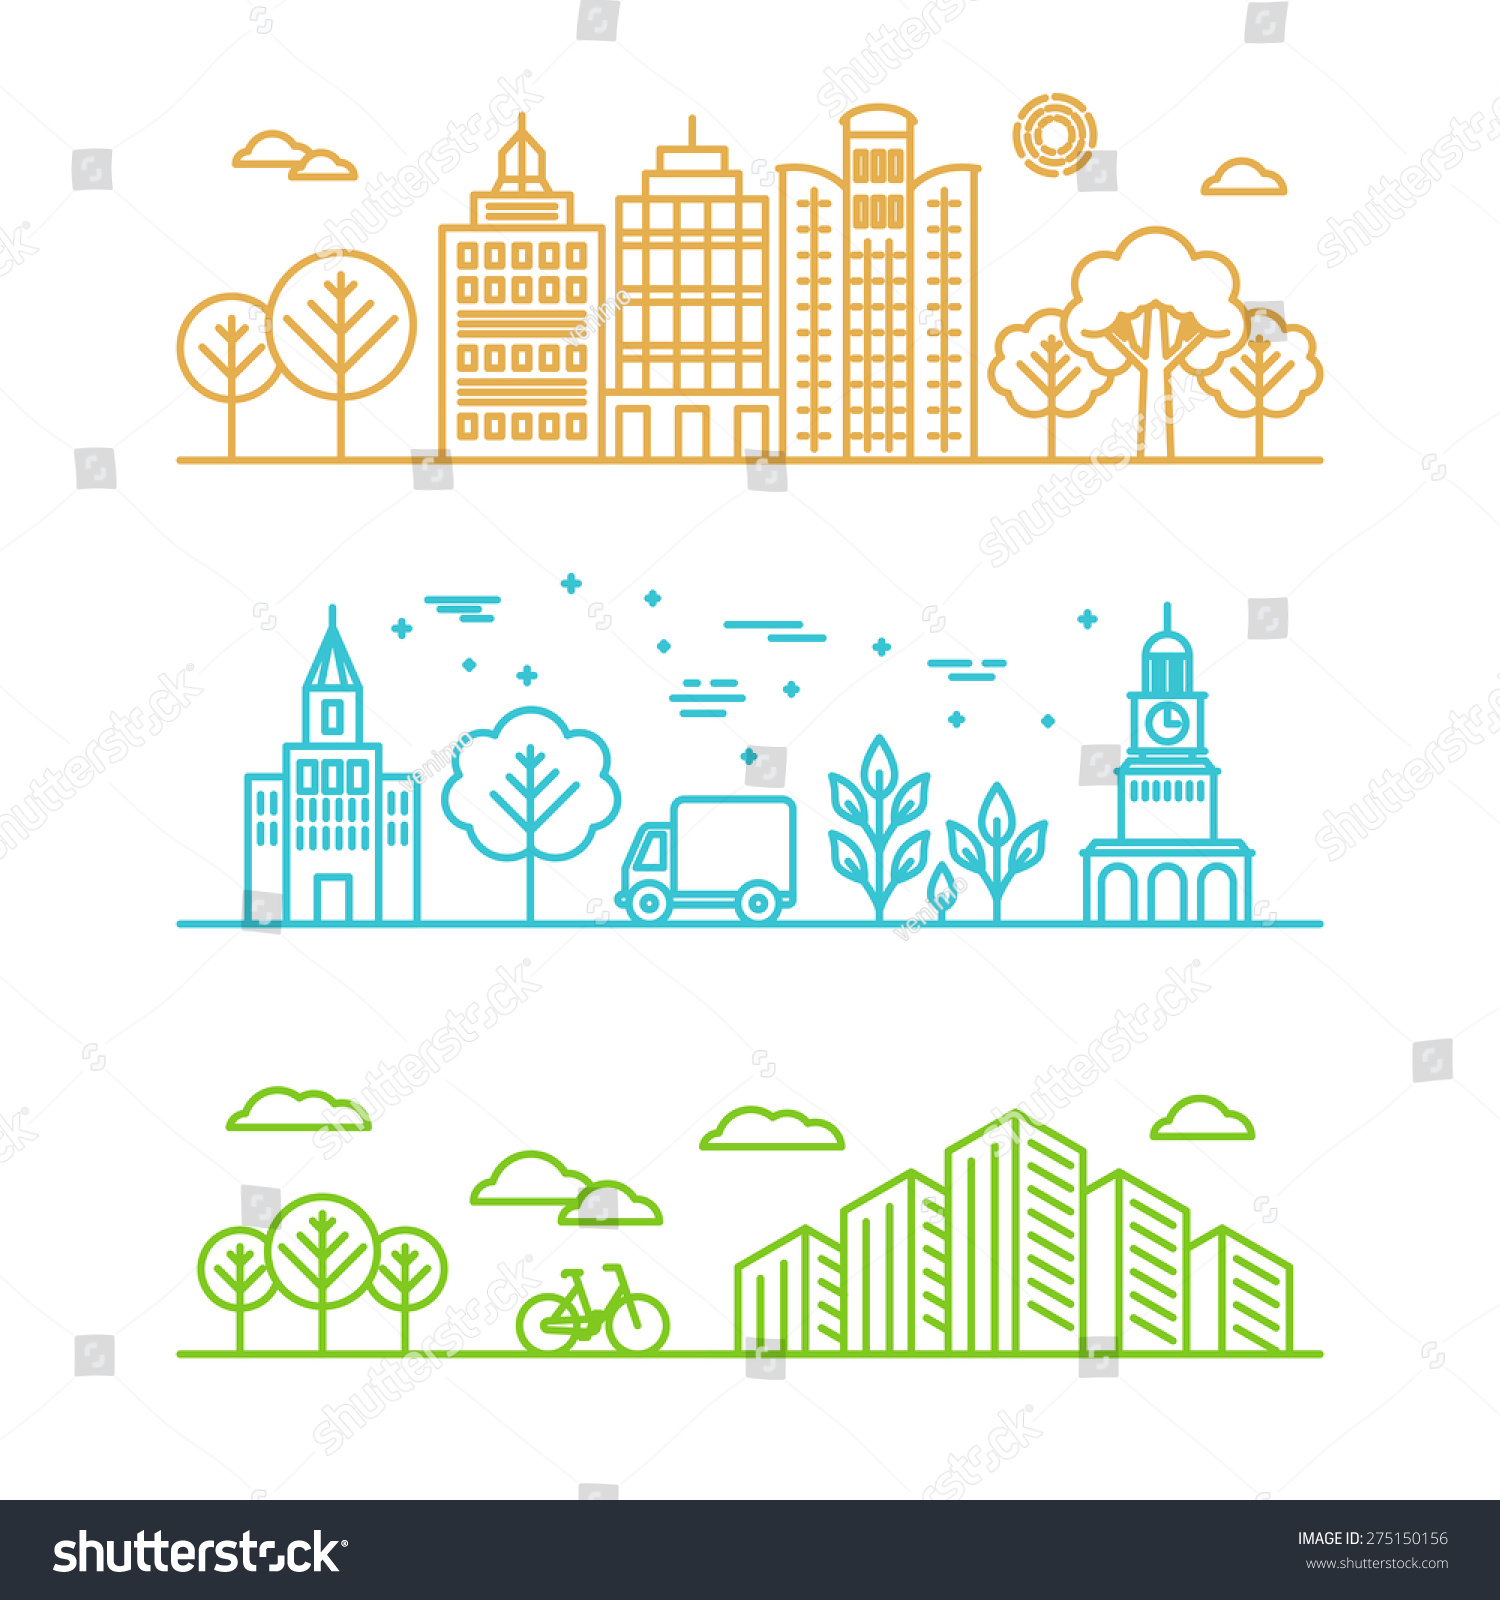 ... in linear style - buildings and clouds - graphic design template